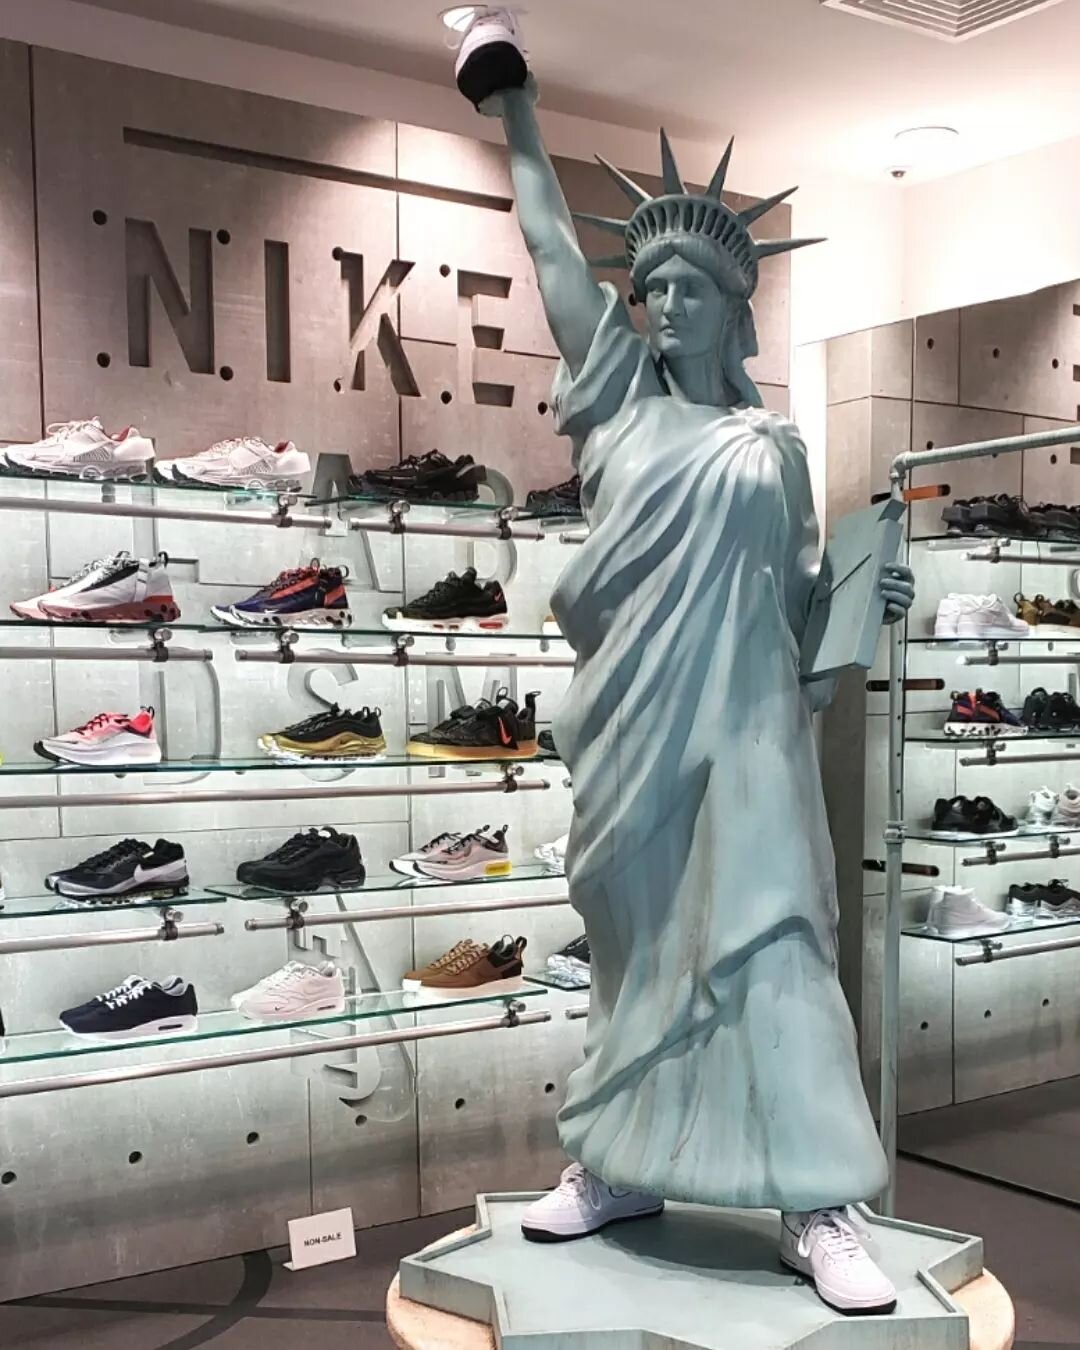 We loved building lady liberty so Nike sneakers would fit onto her feet and in her hand👟

For Dover Street Market, we recreated the Statue of Liberty sporting and holding a pair of Nike Sneakers. We designed a 3D model of the statue and then milled 